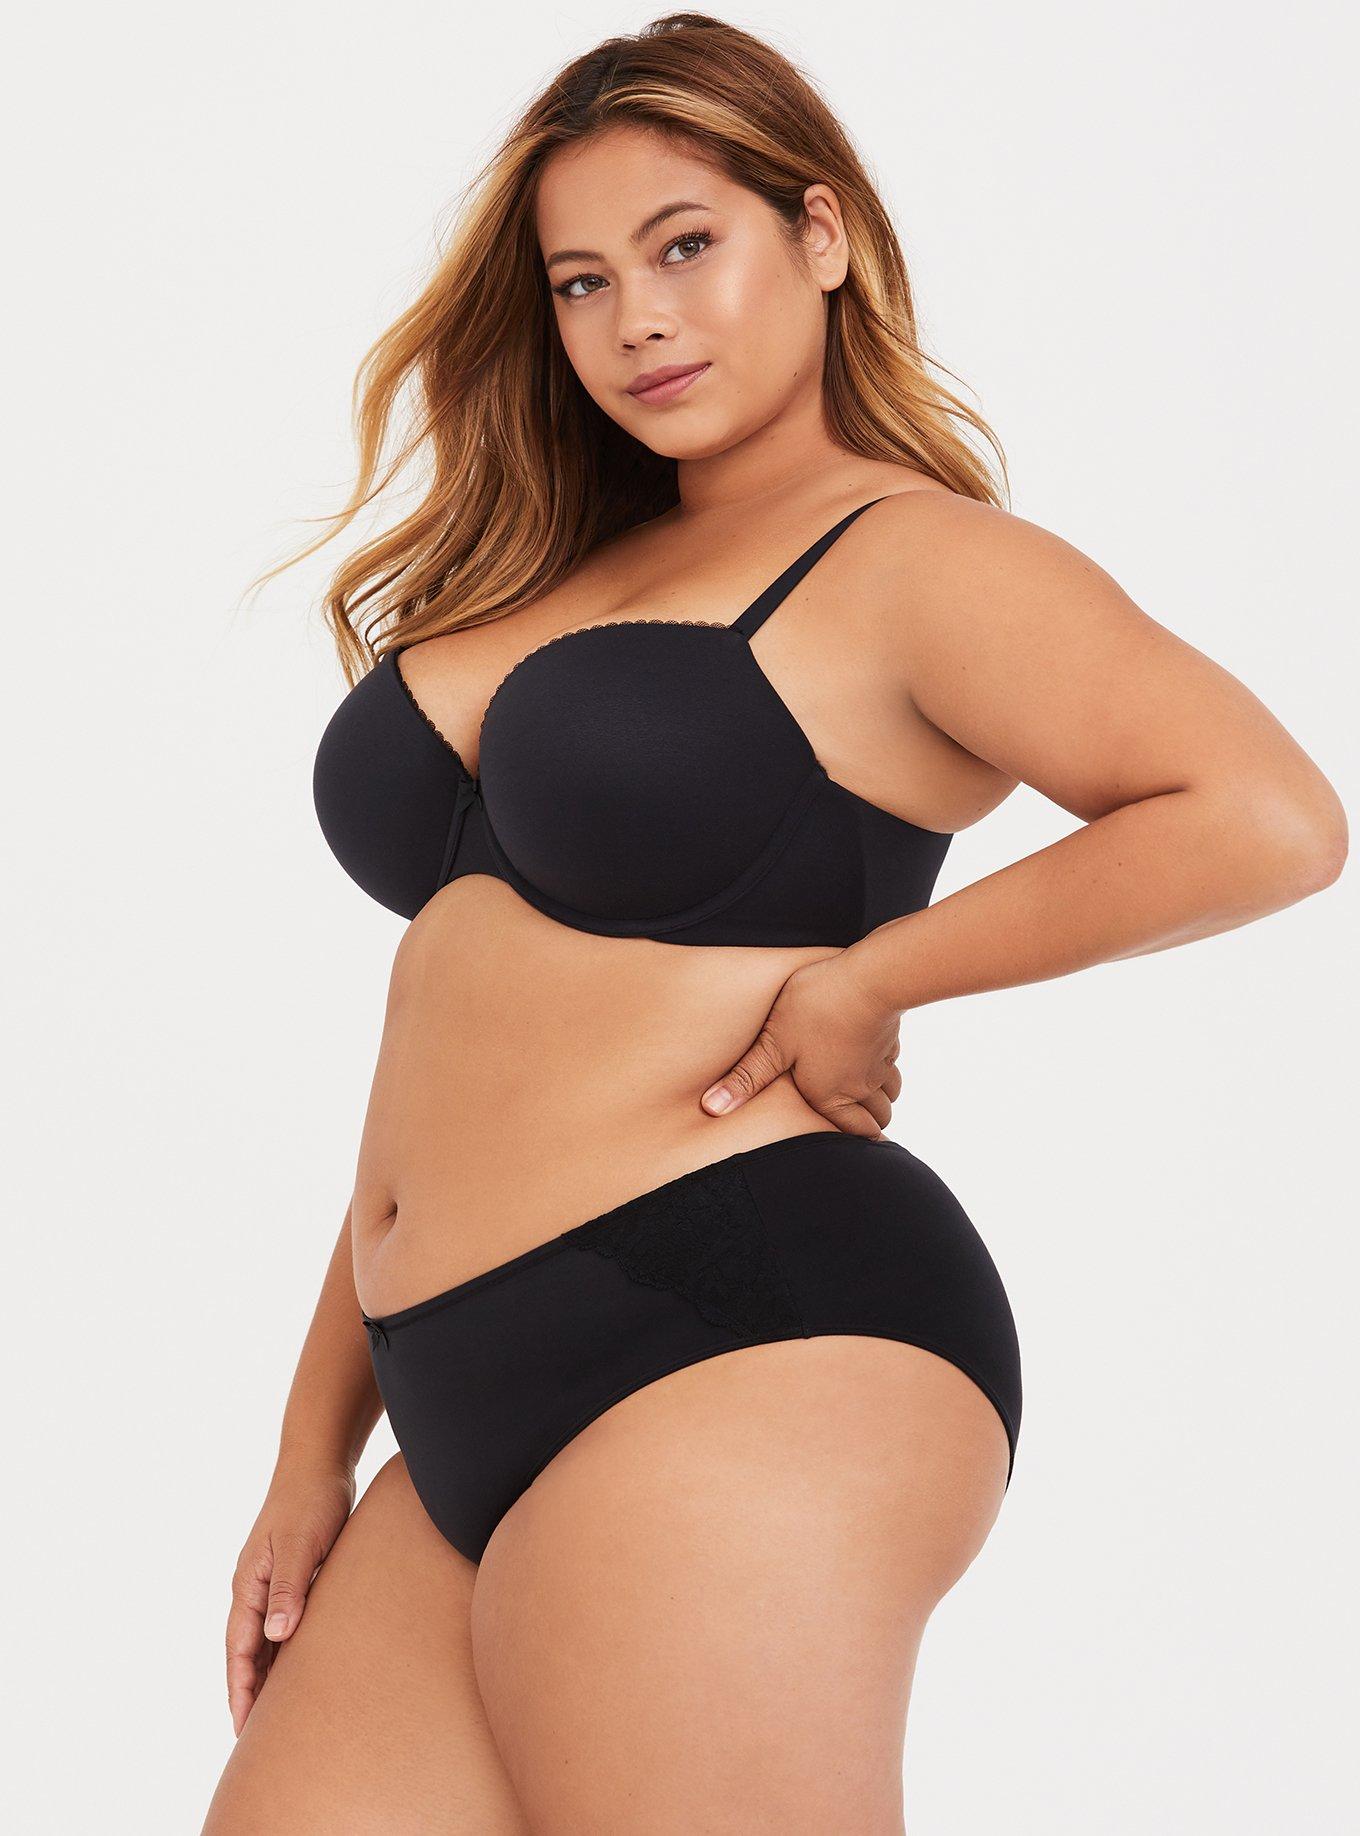 Torrid T-Shirt Lightly Lined Smooth 360° Back Smoothing Bra 44DD Size  undefined - $20 - From Kelly